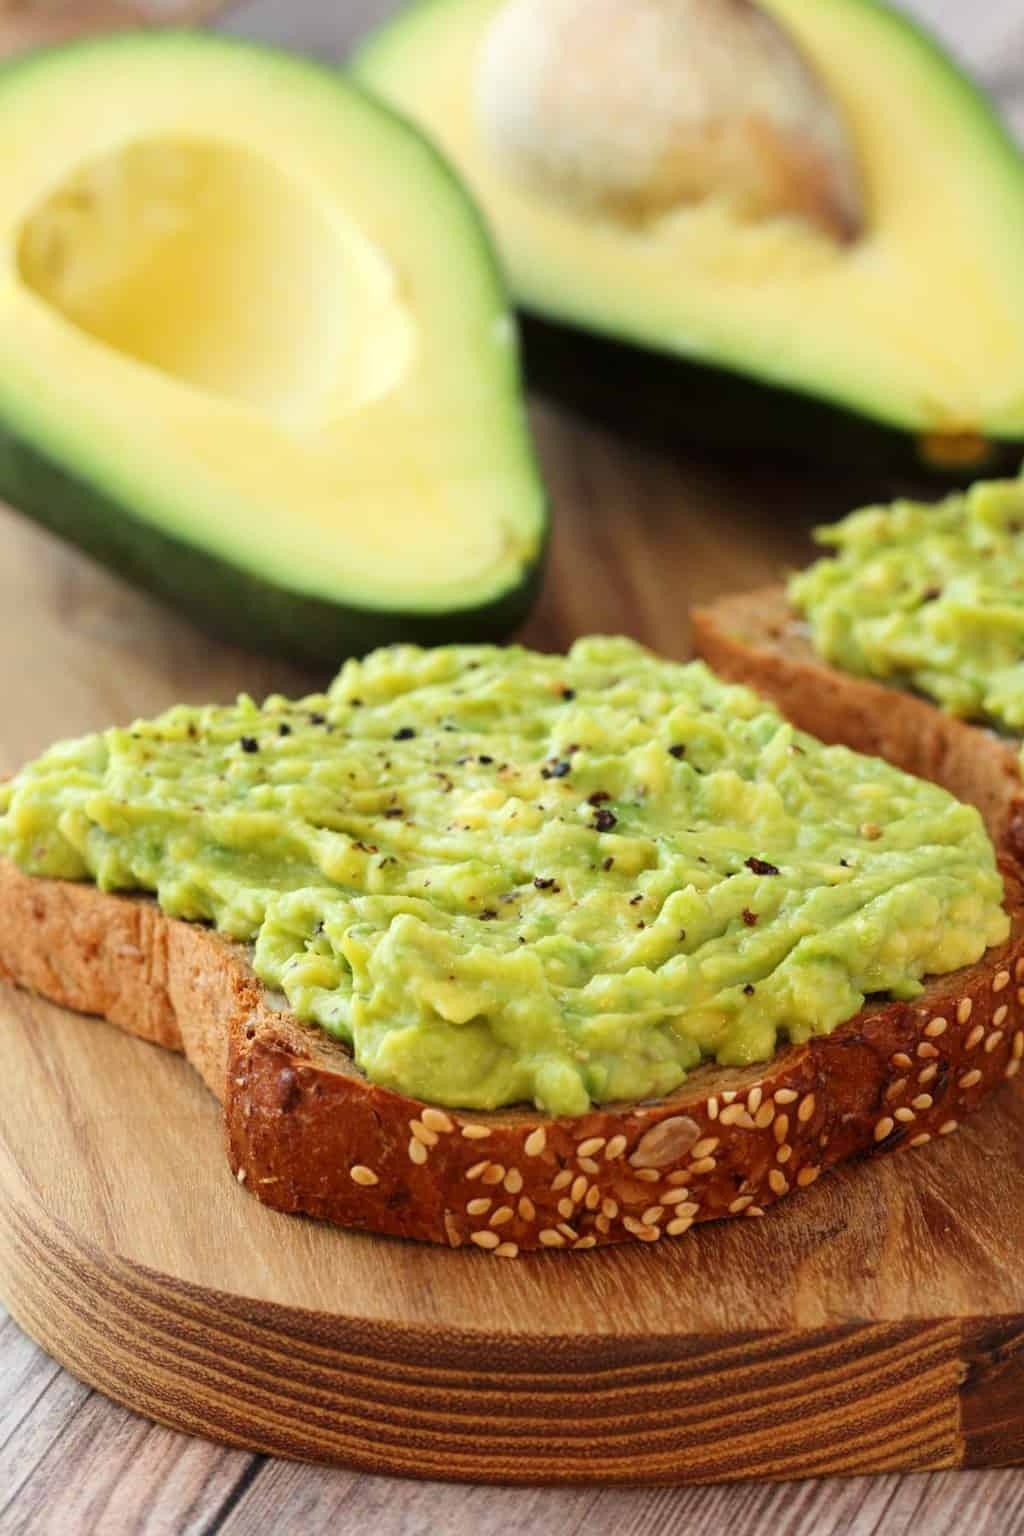 Avocado toast topped with black pepper. Avocado halves in the background. 